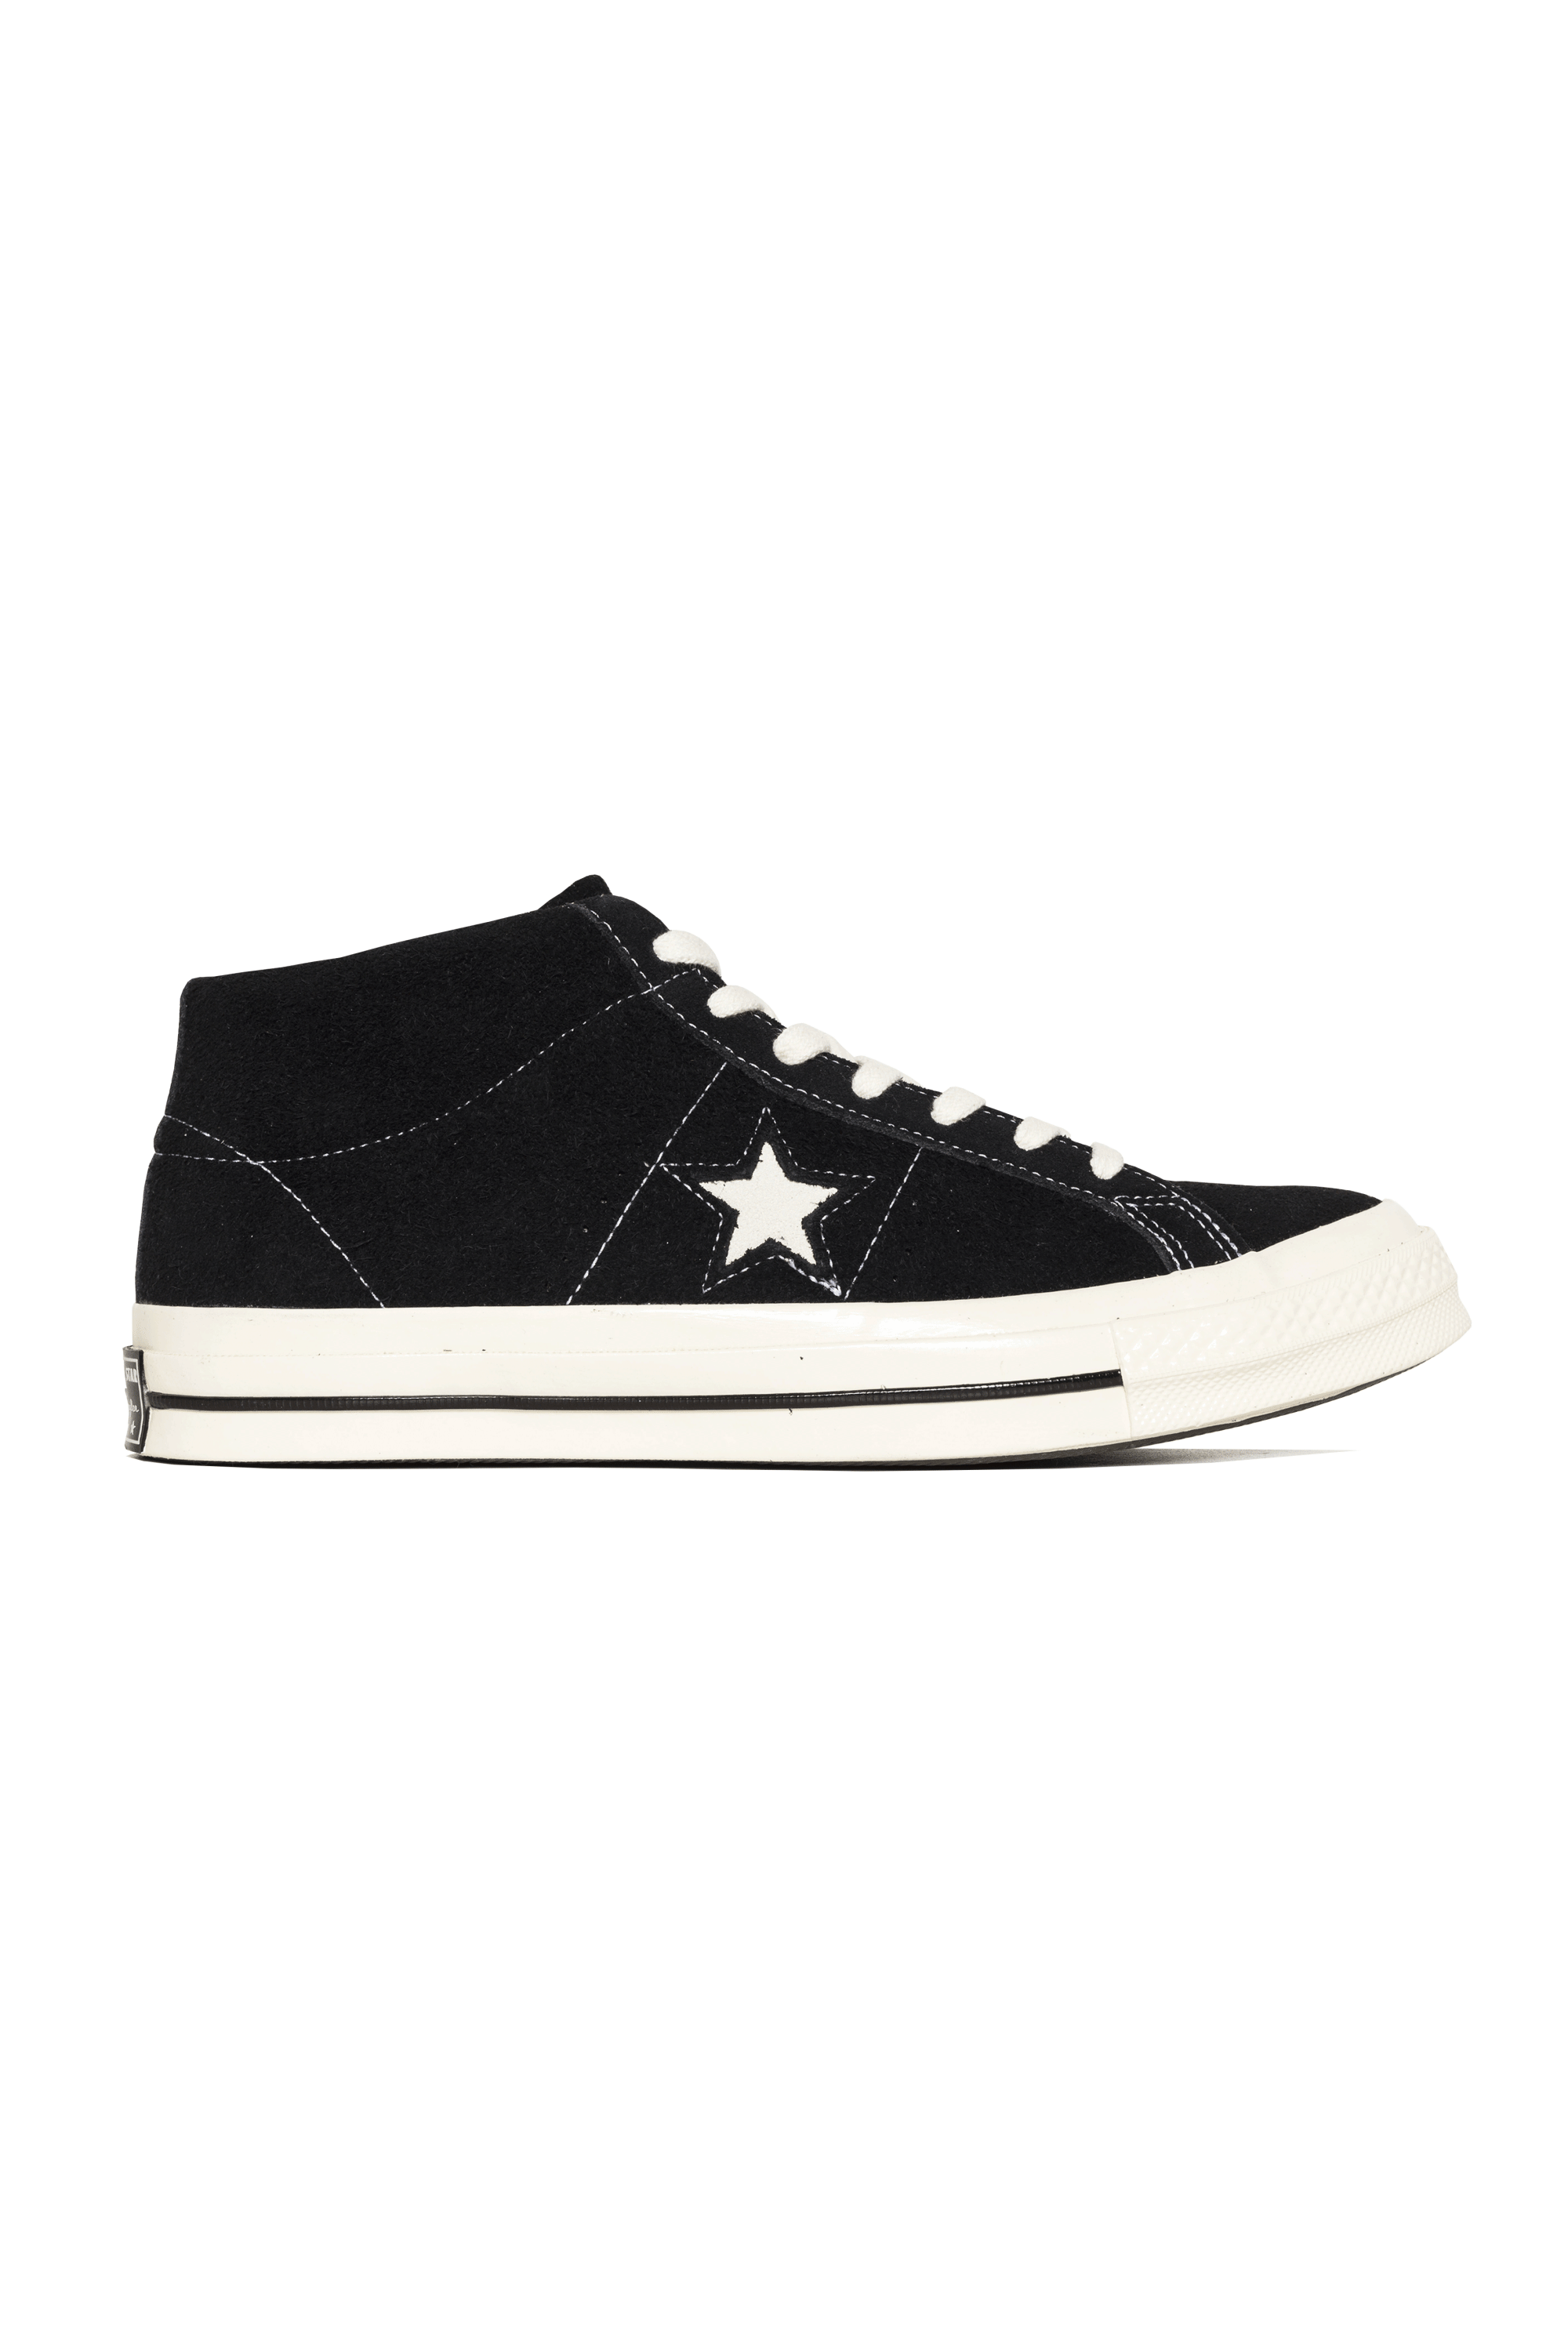 Converse Sneakers One Star Mid Black 157701C#000#C0010#5 - One Block Down